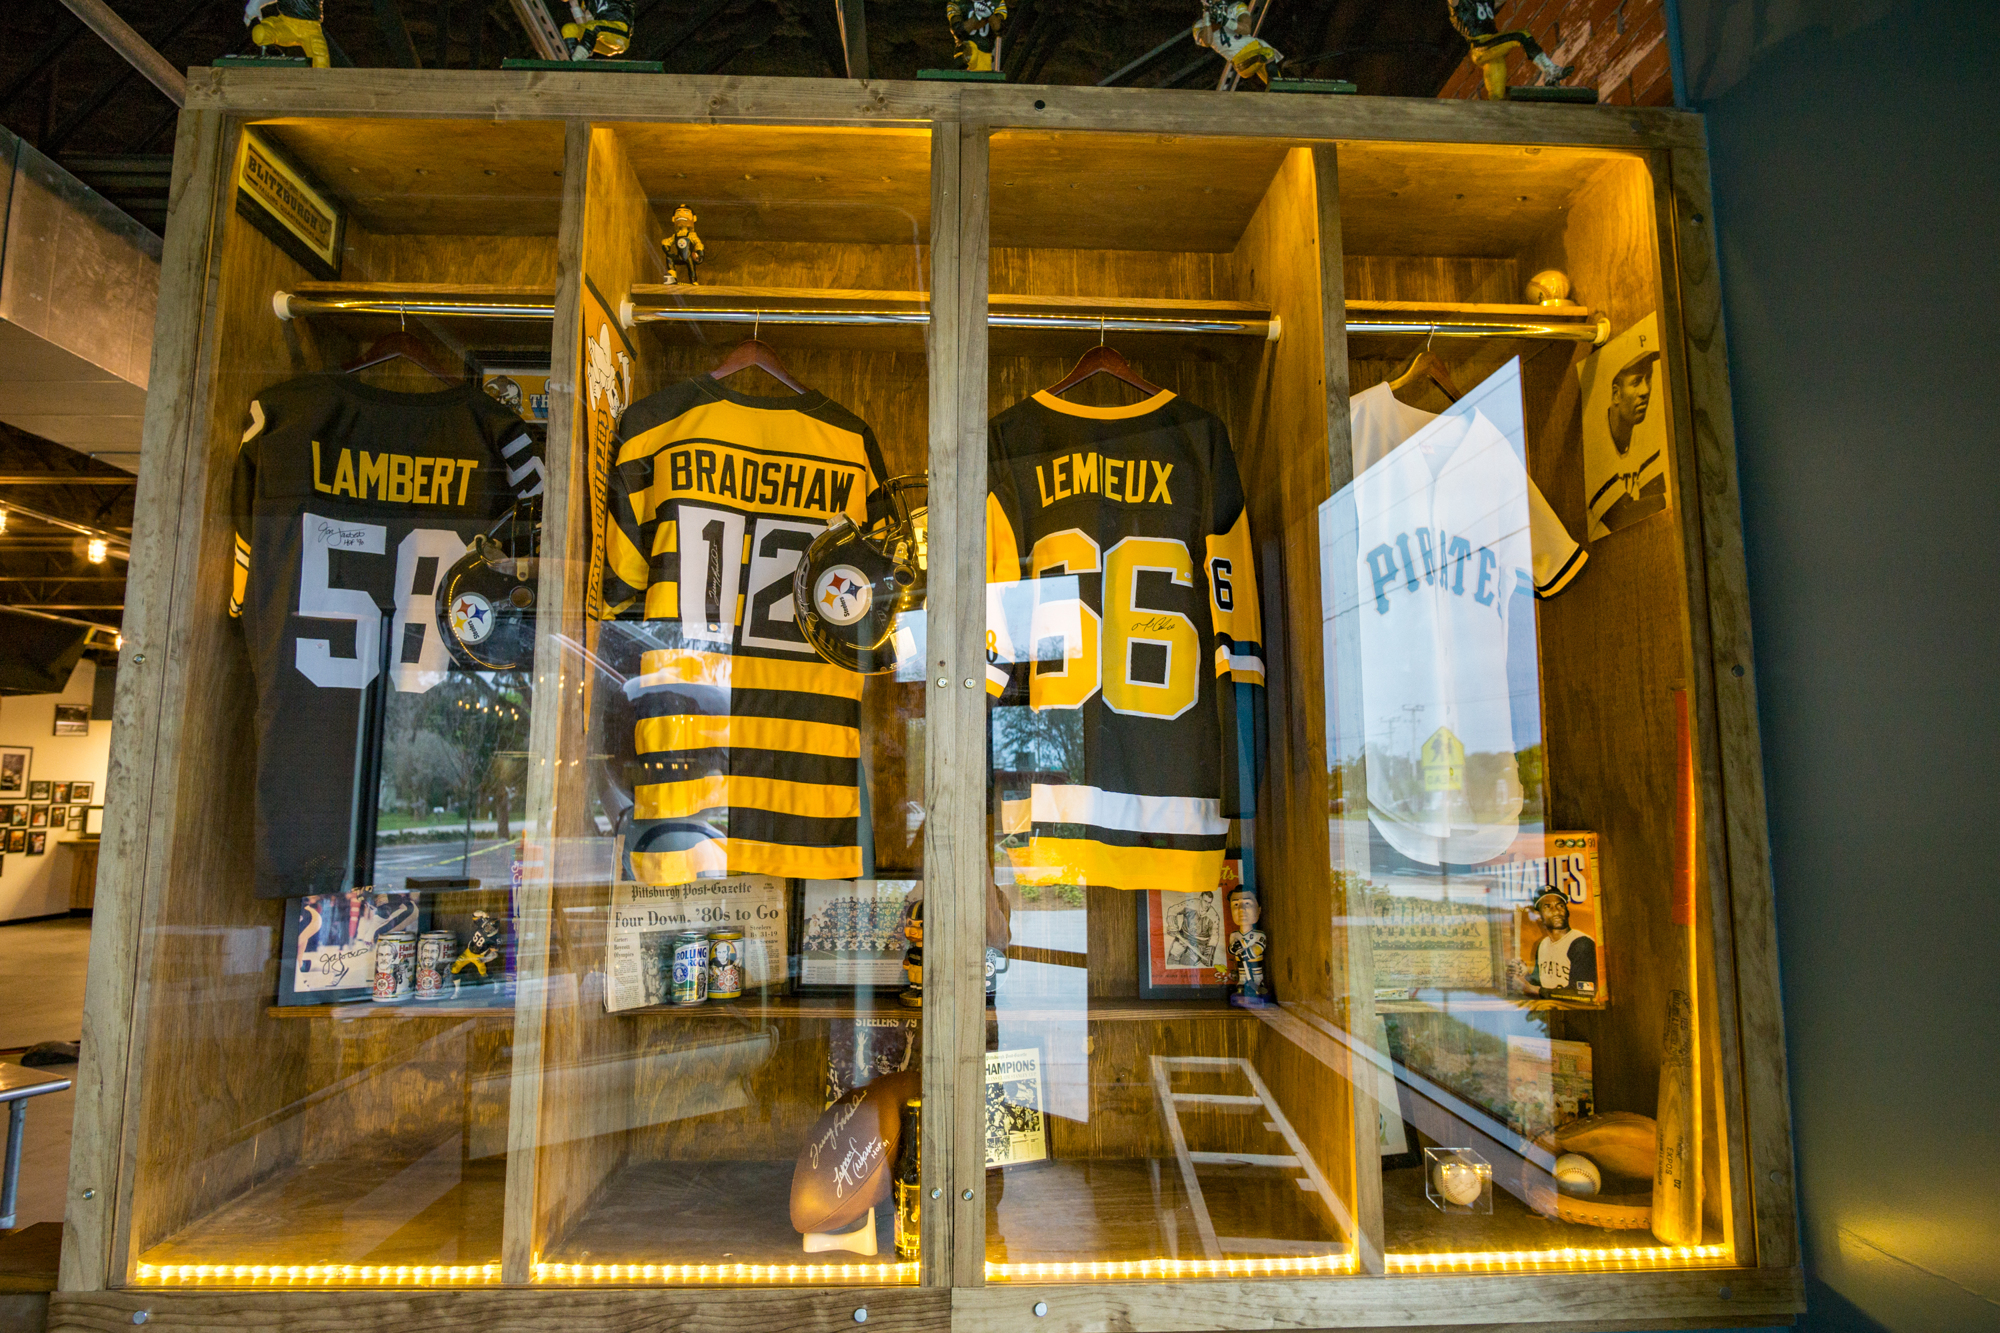 Giuseppe's Steel City Pizza is featuring a custom built locker-style display case with high school football jersey's from the Pittsburg area. Photo by Zach Fedewa